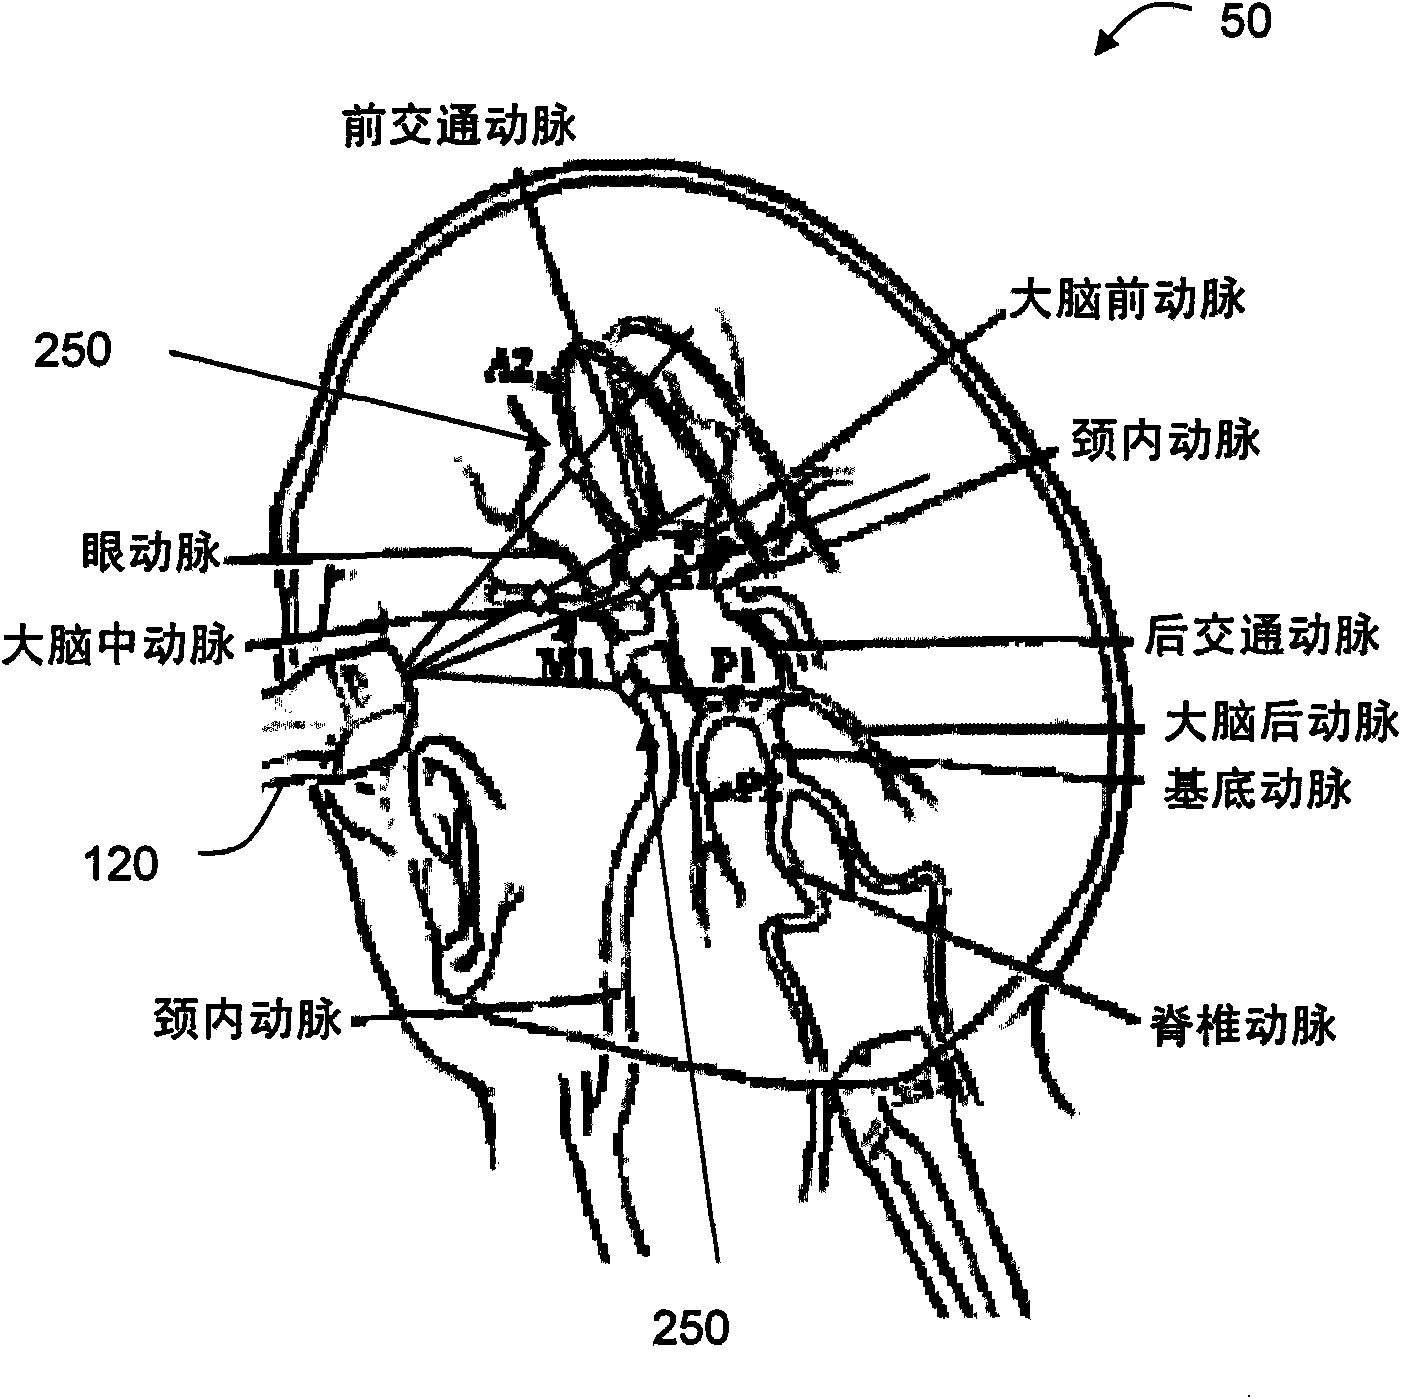 Method and system for imaging vessels